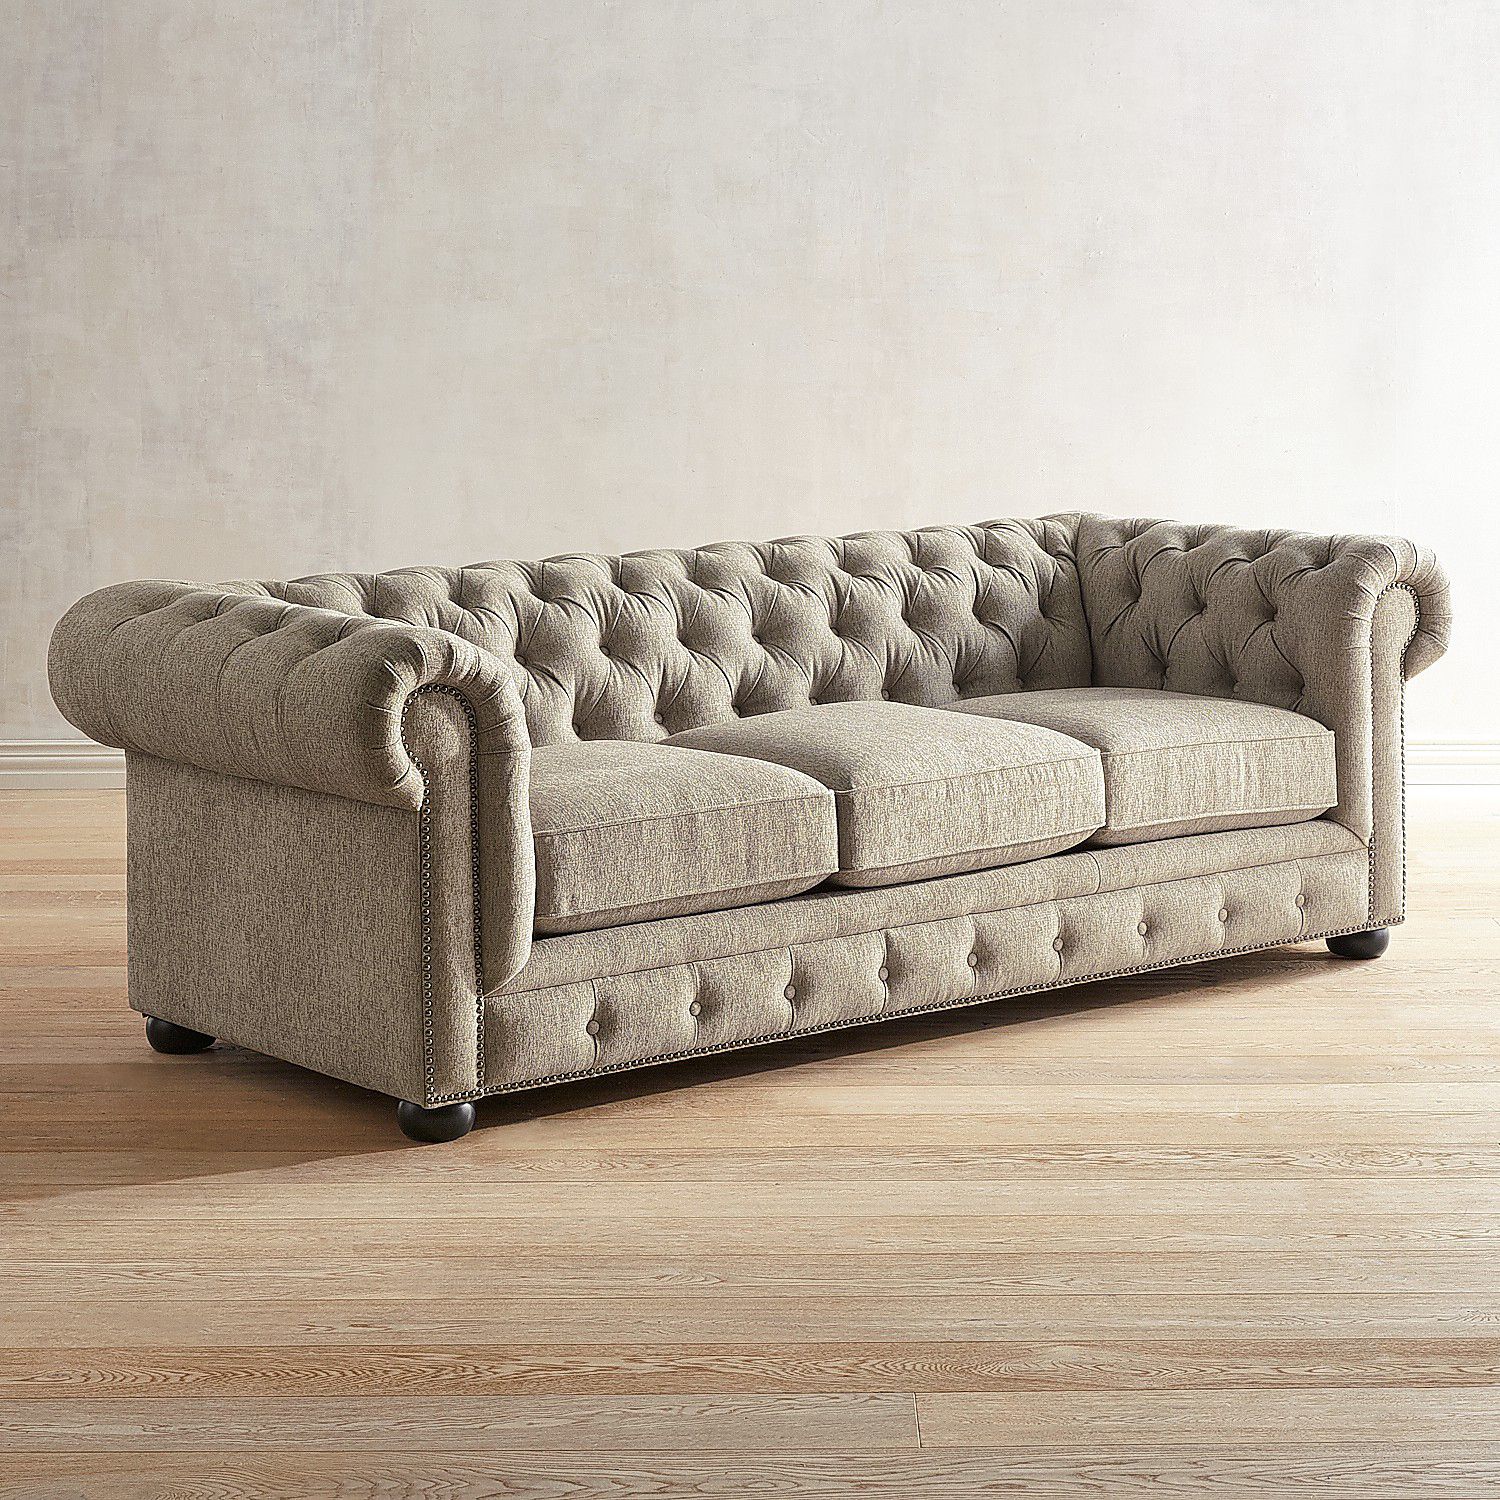 How to buy a chesterfield
sofa?